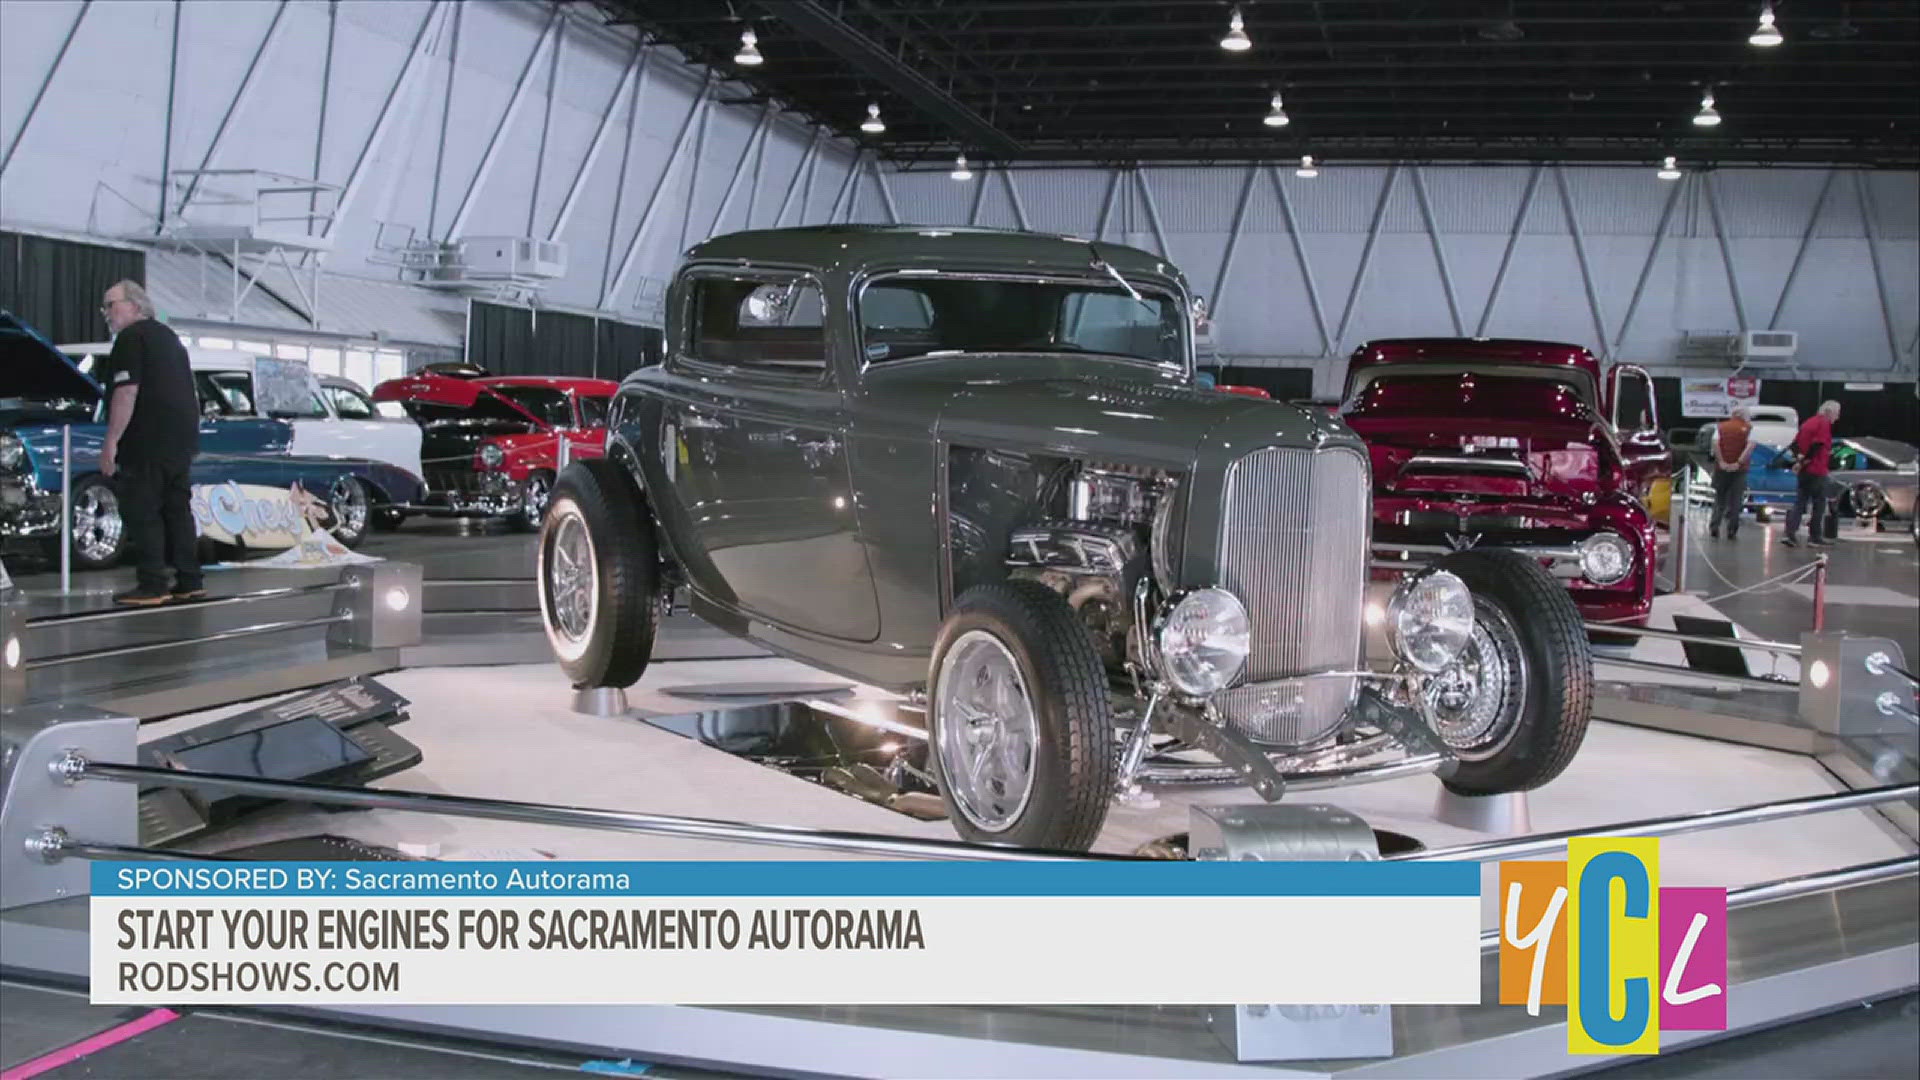 Sacramento Autorama returns to Cal Expo for the 73rd year. Find out what awaits at one of Northern California's biggest car shows. Sponsored by Sacramento Autorama.